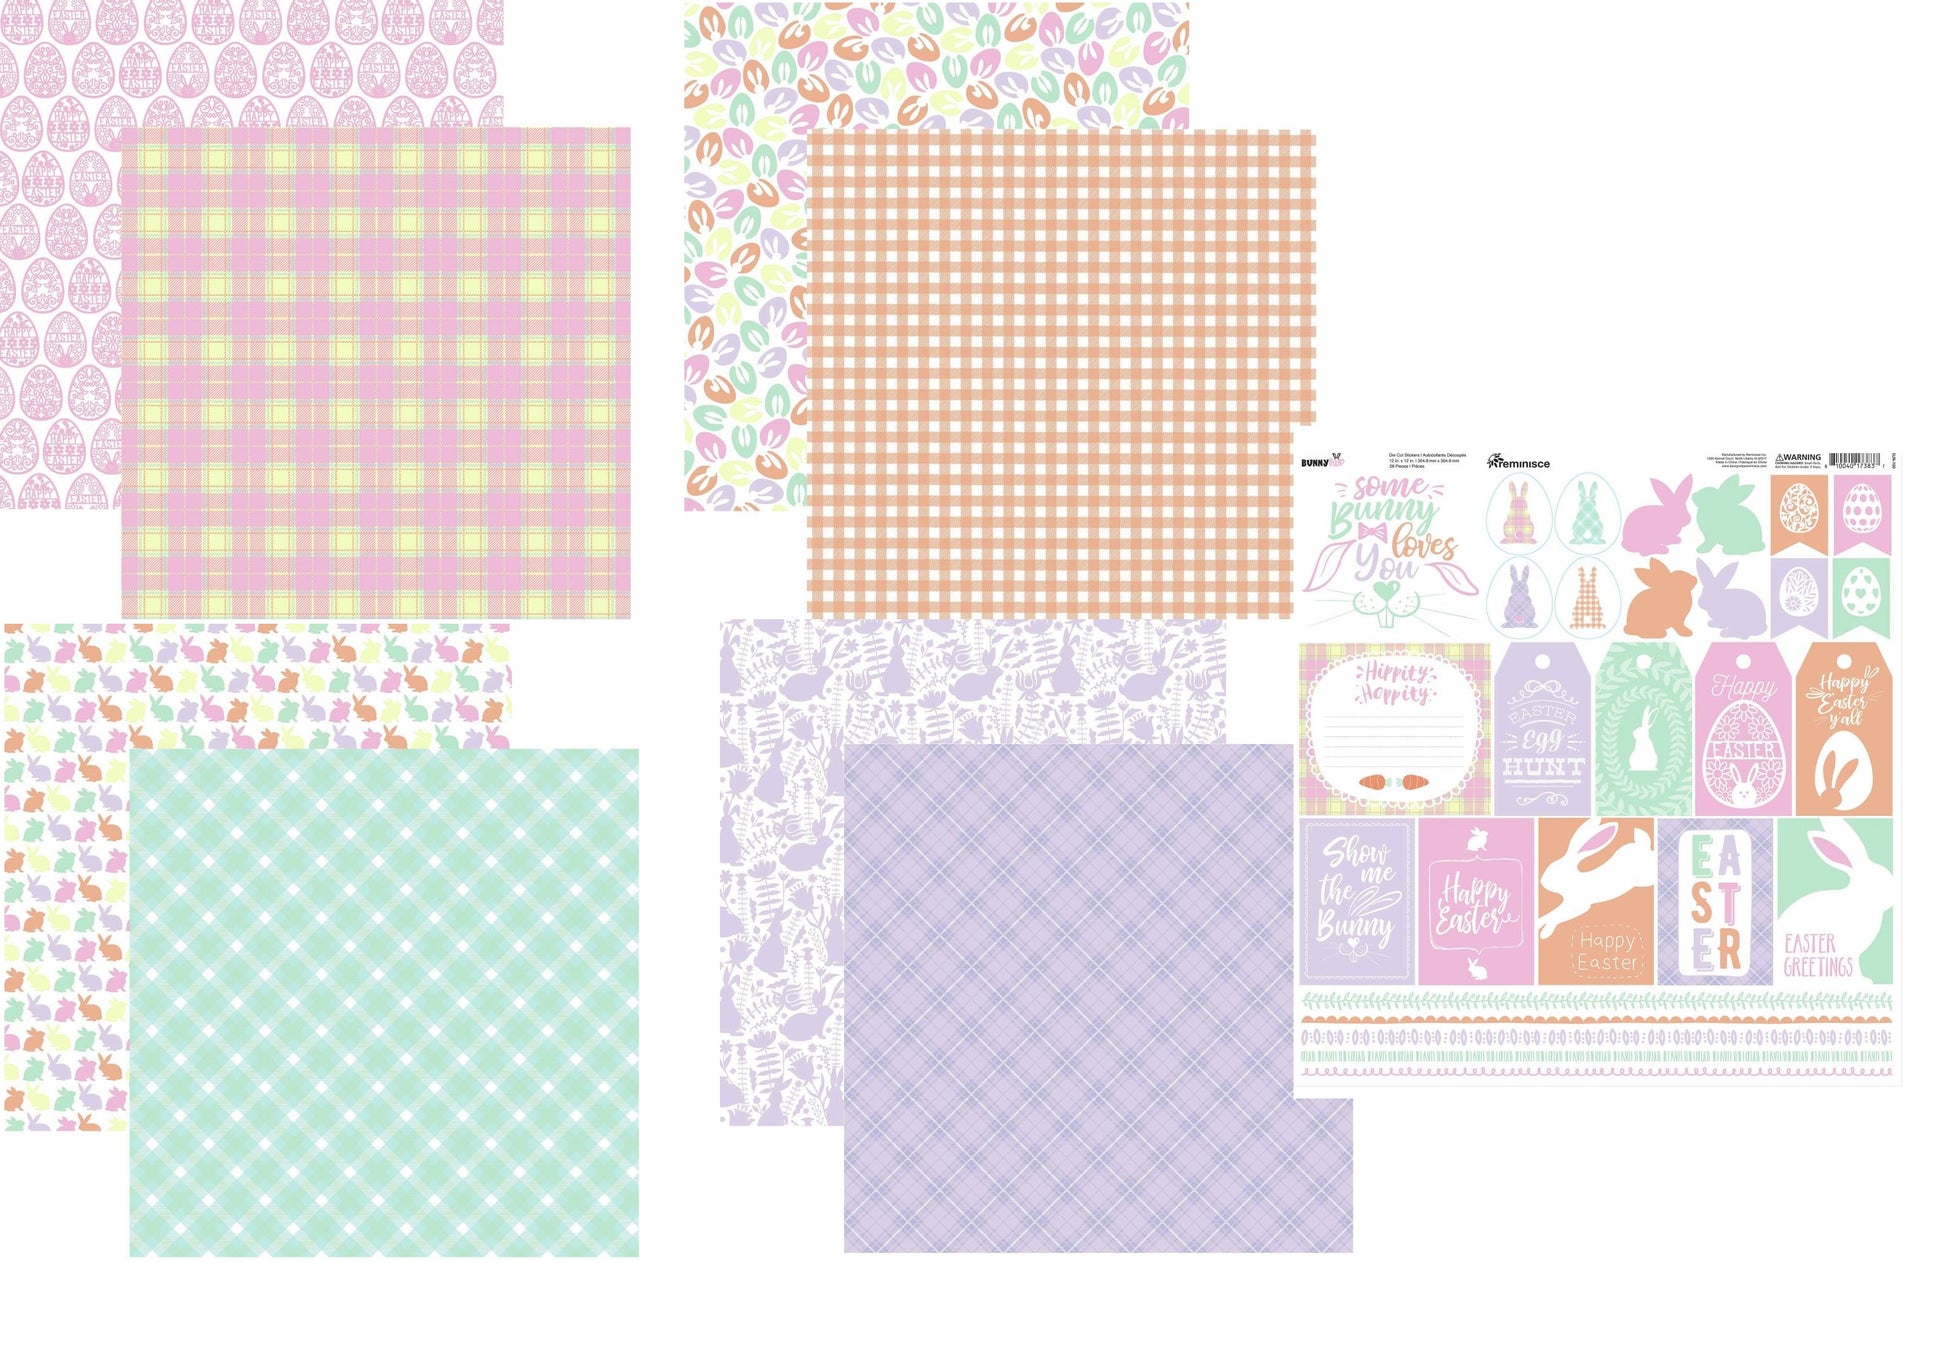 Reminisce Bunny Hop Scrapbook Papers and Stickers